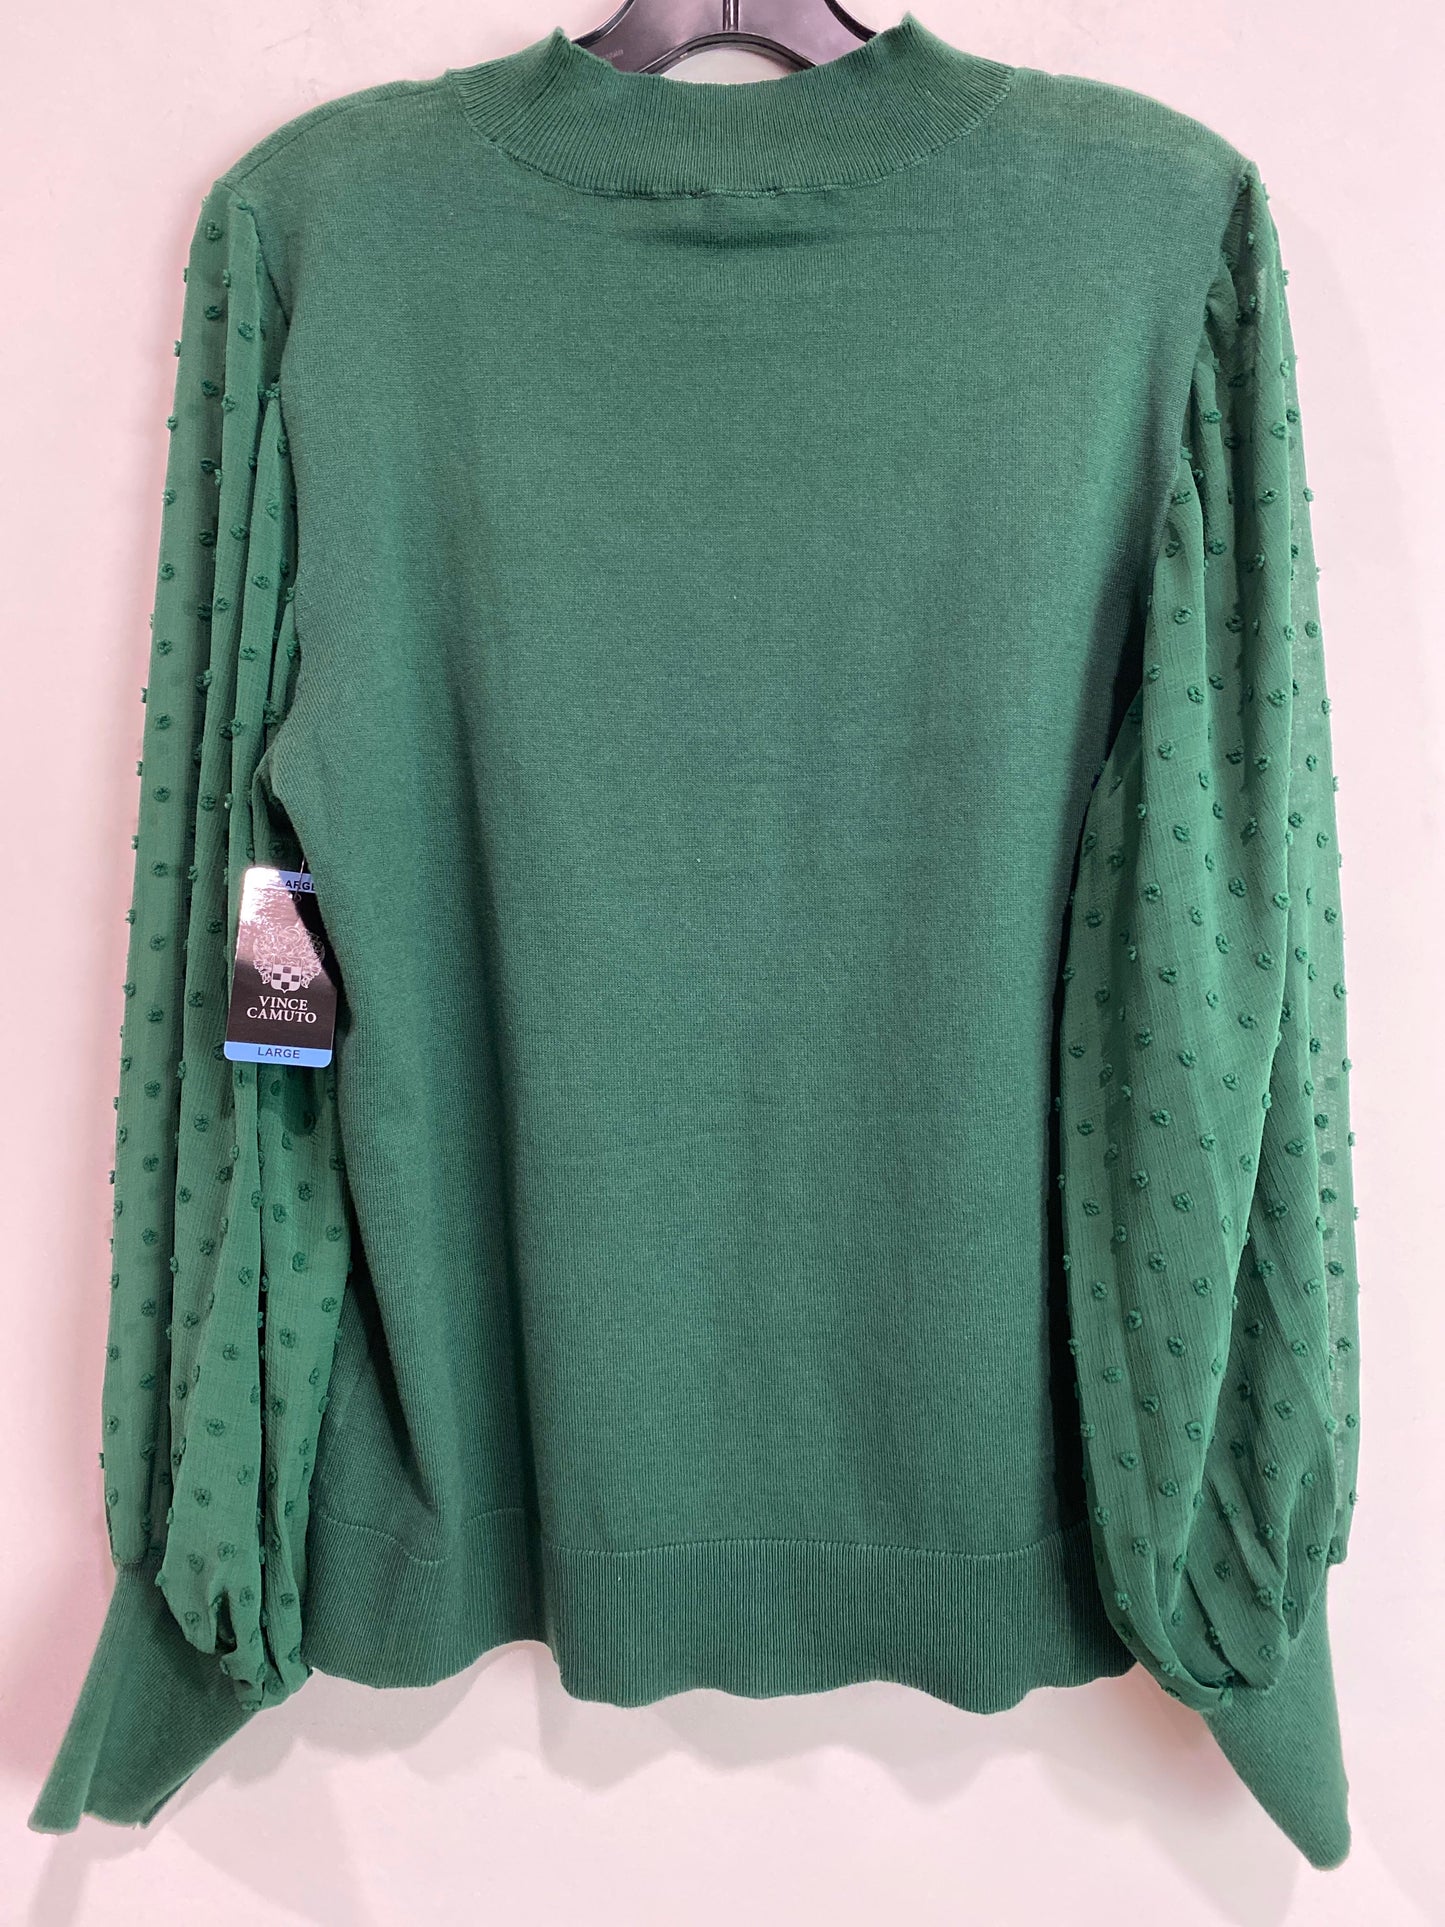 Green Top Long Sleeve Vince Camuto, Size L